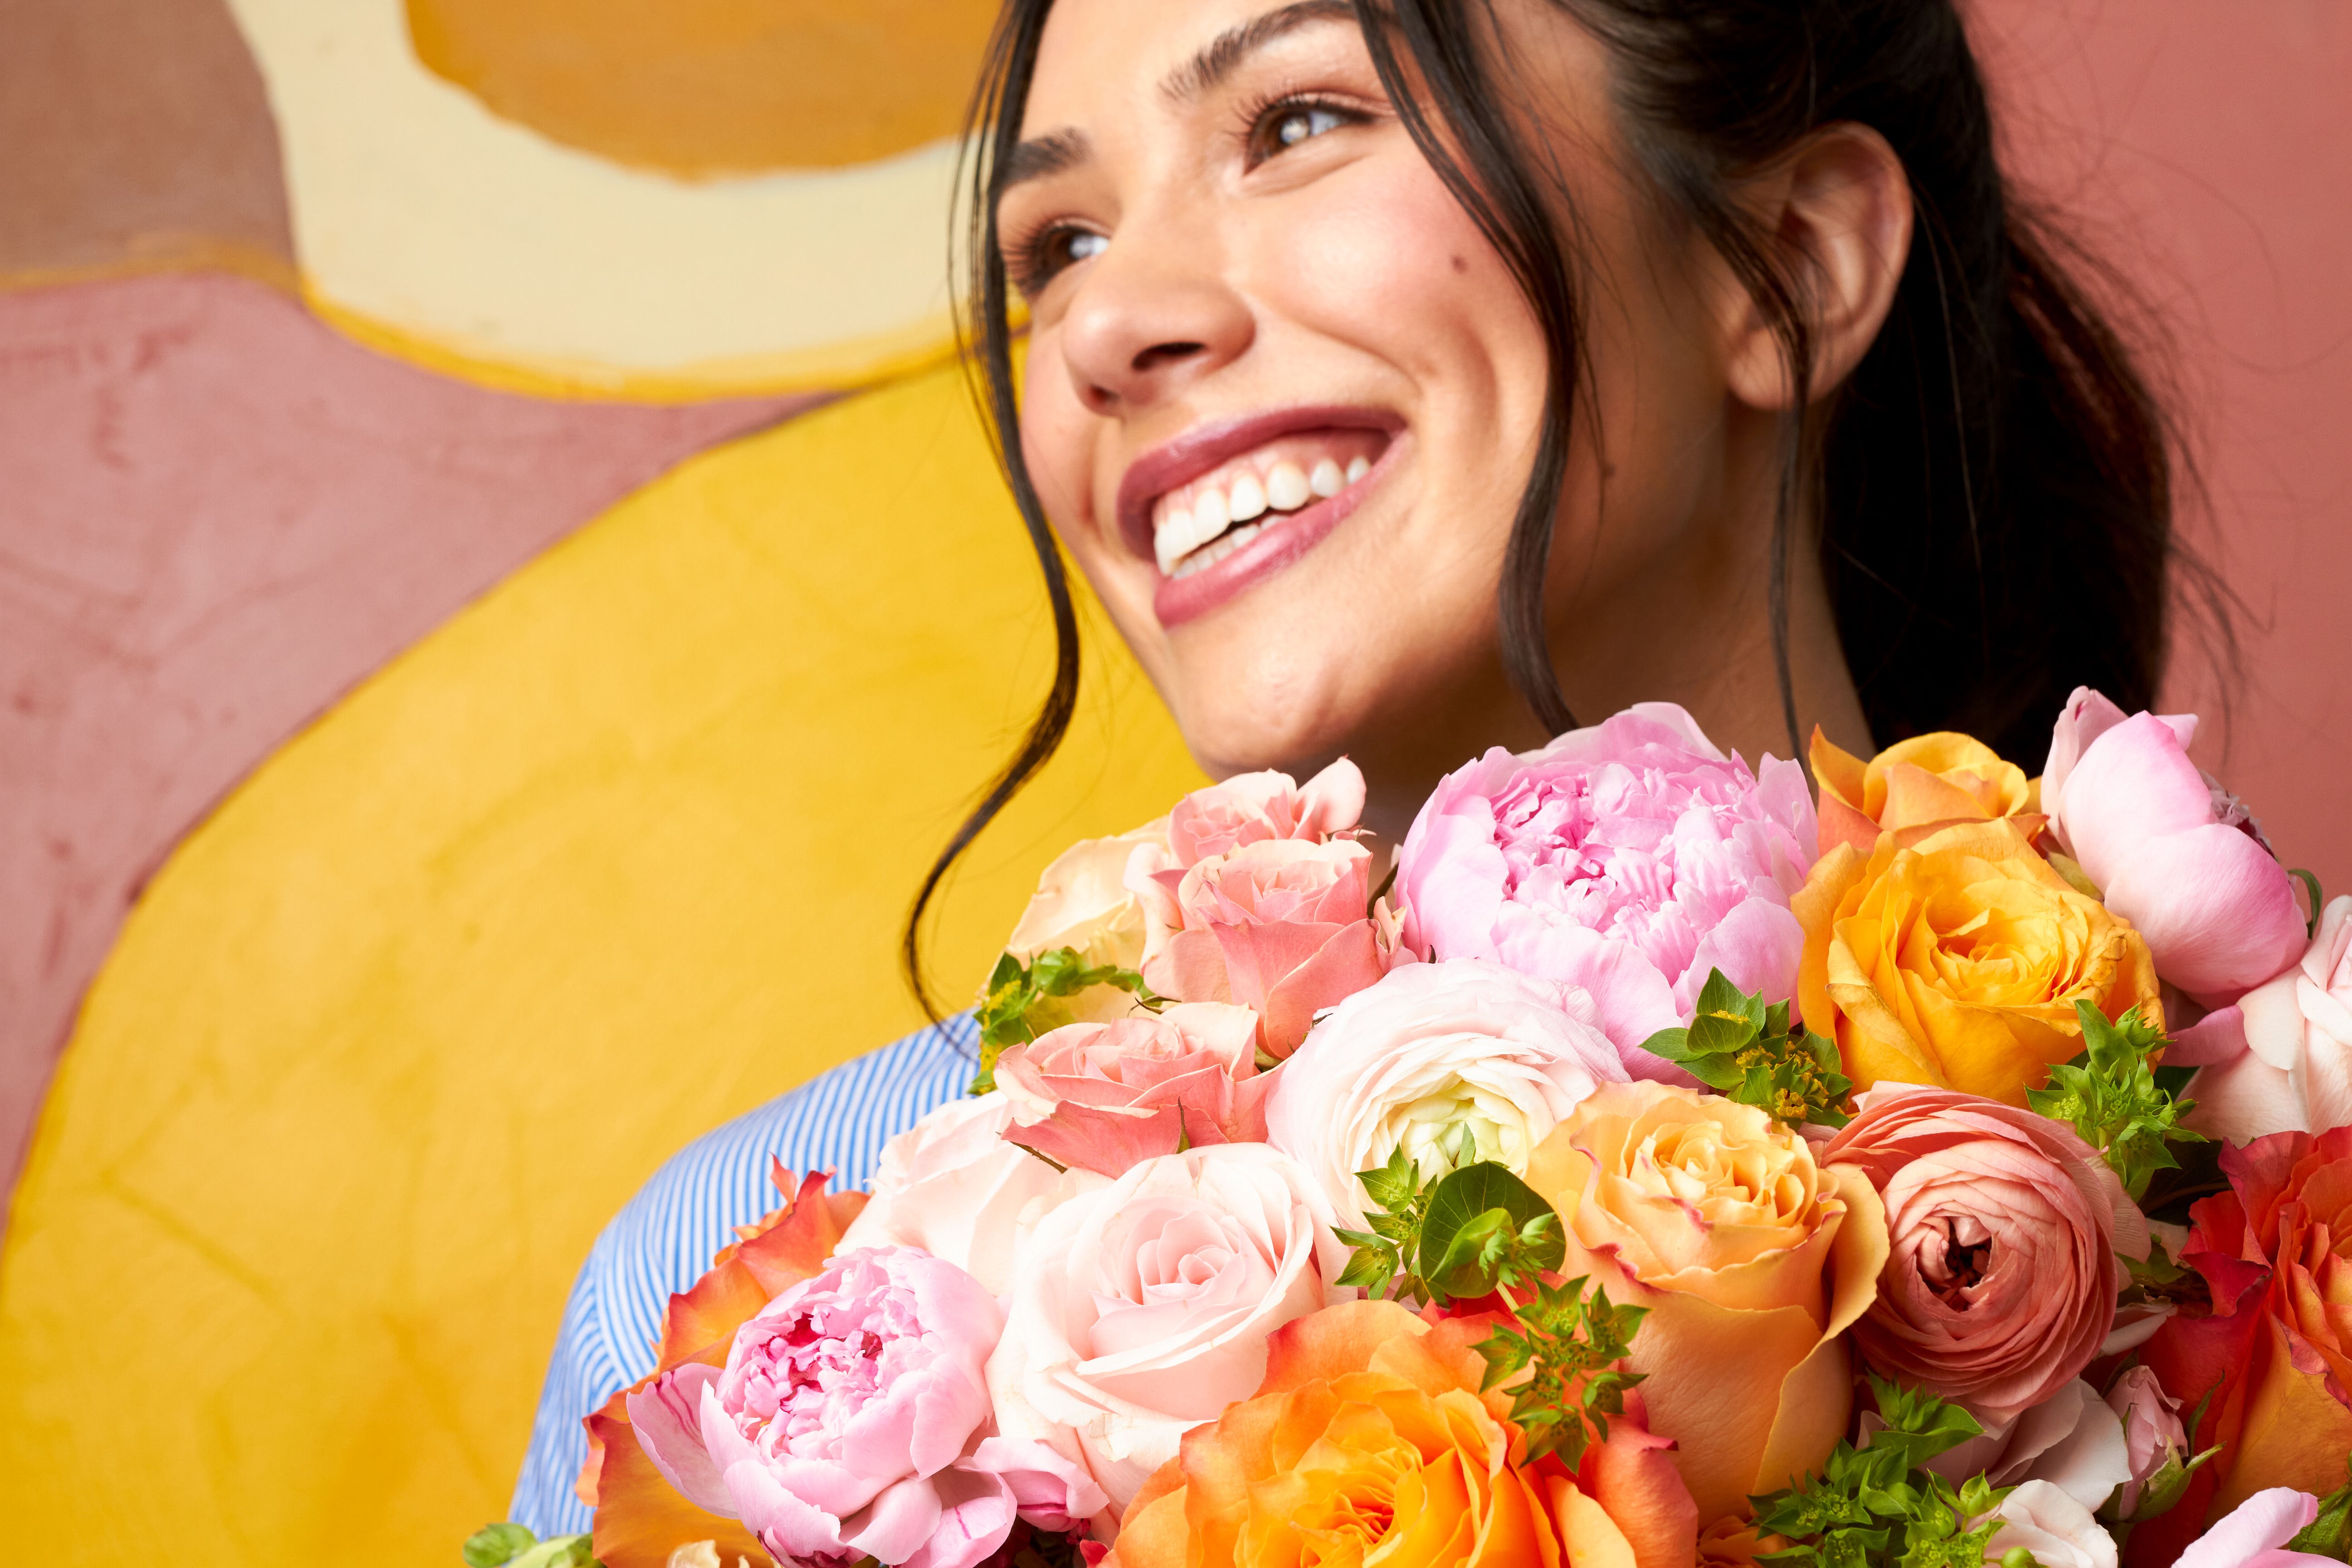 Close up of a woman holding a bouquet in preparation for Easter brunch.